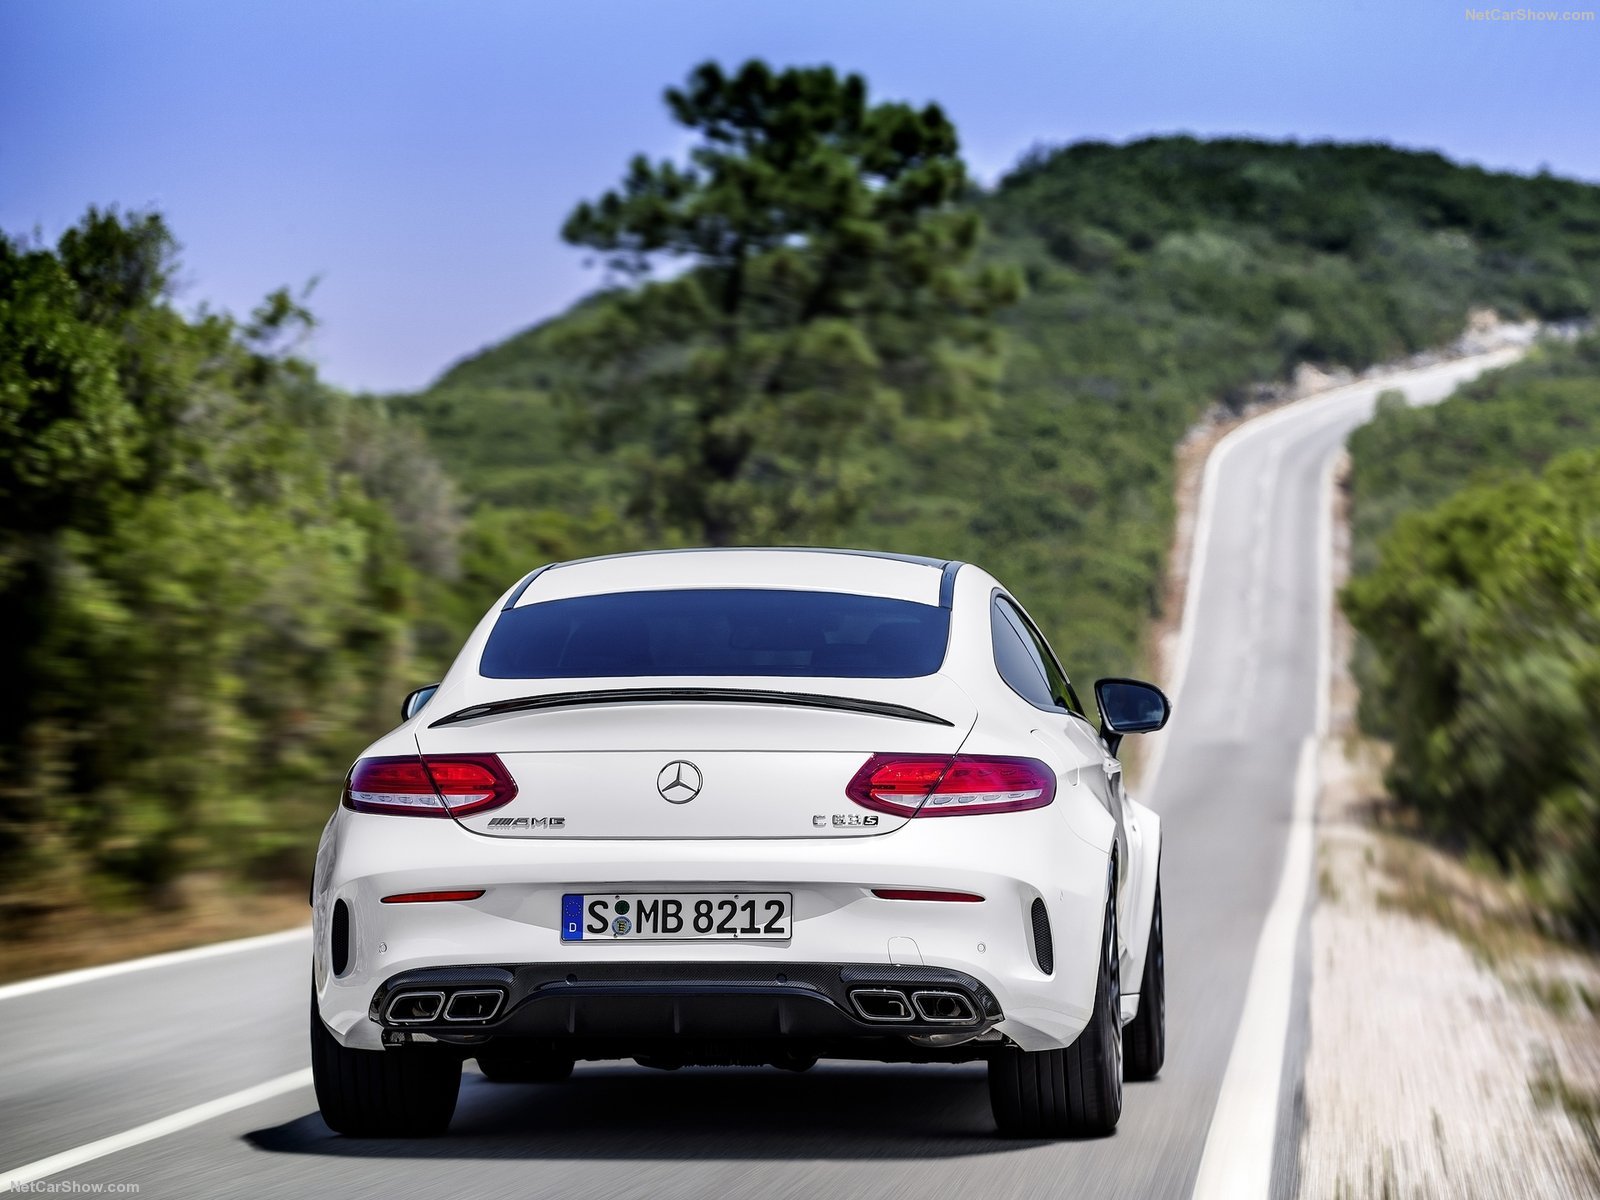 Mercedes Benz C63 s AMG Coupe cars 2016 wallpaper